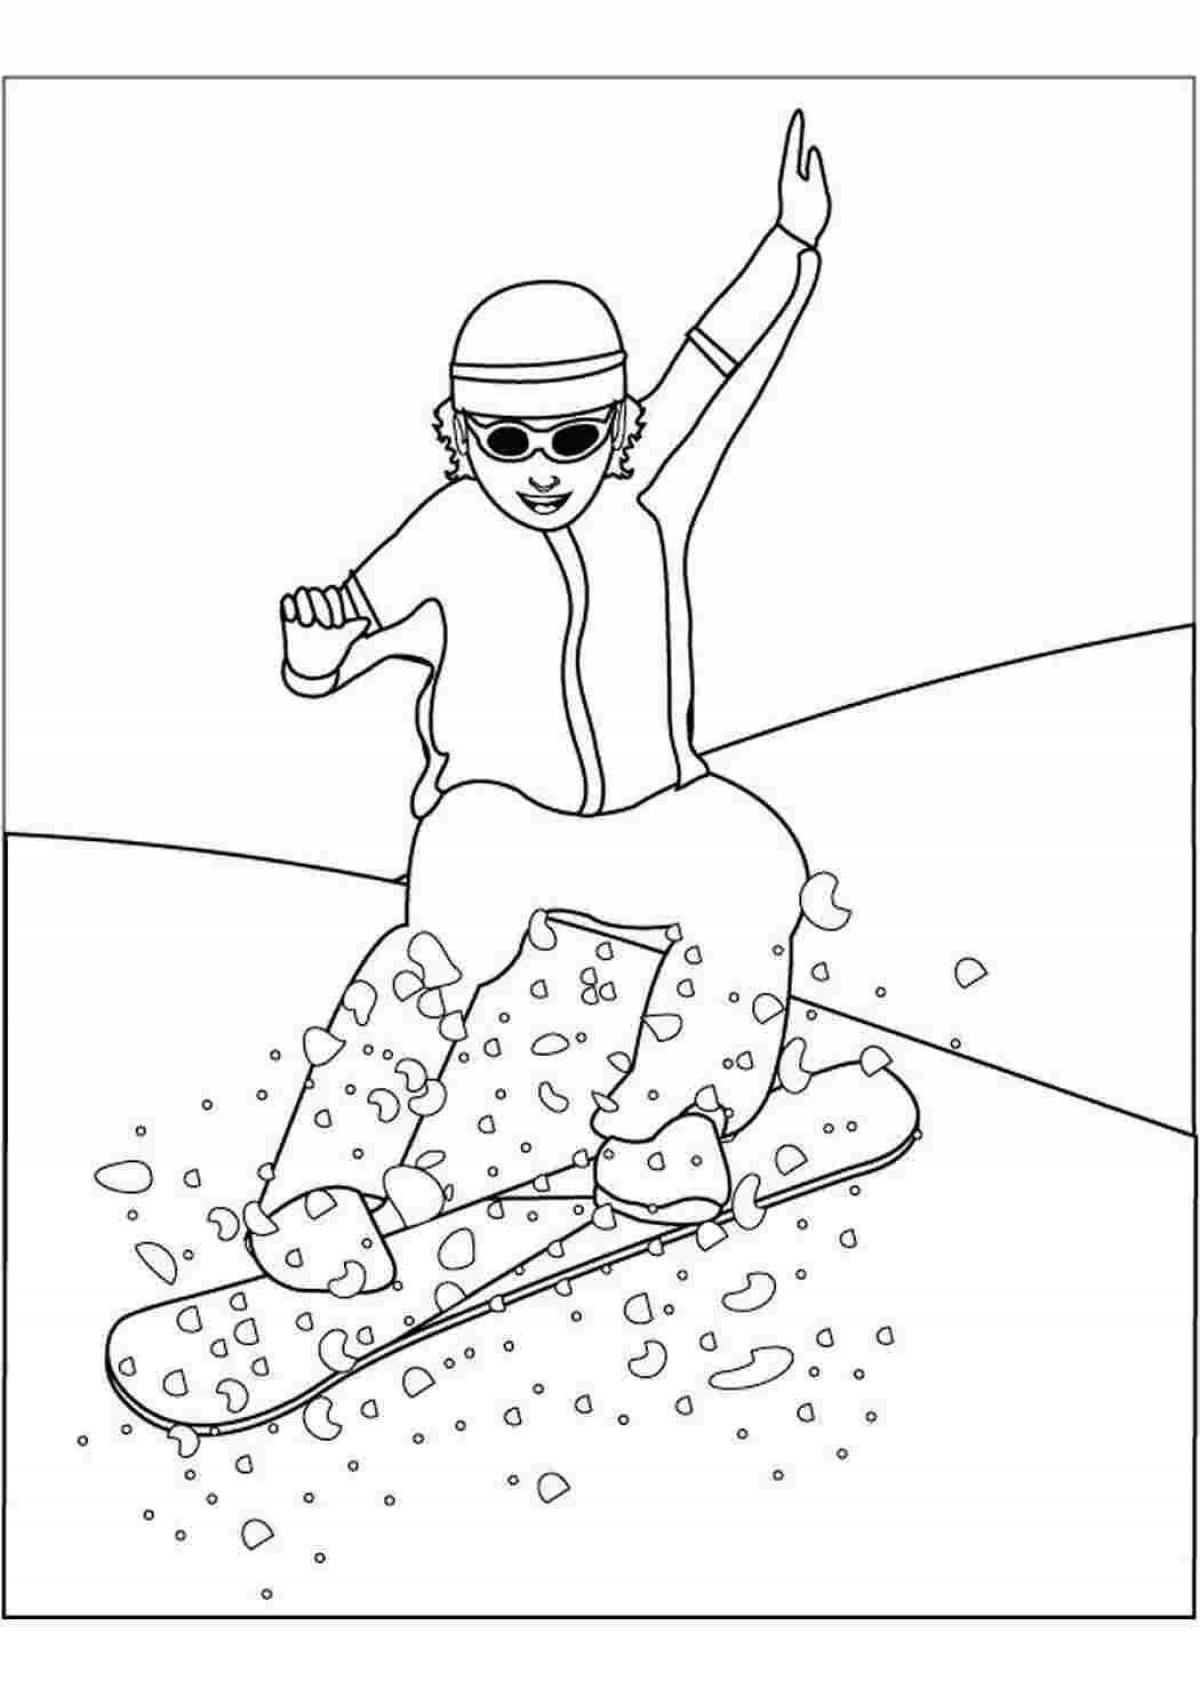 Great snowboard coloring book for kids